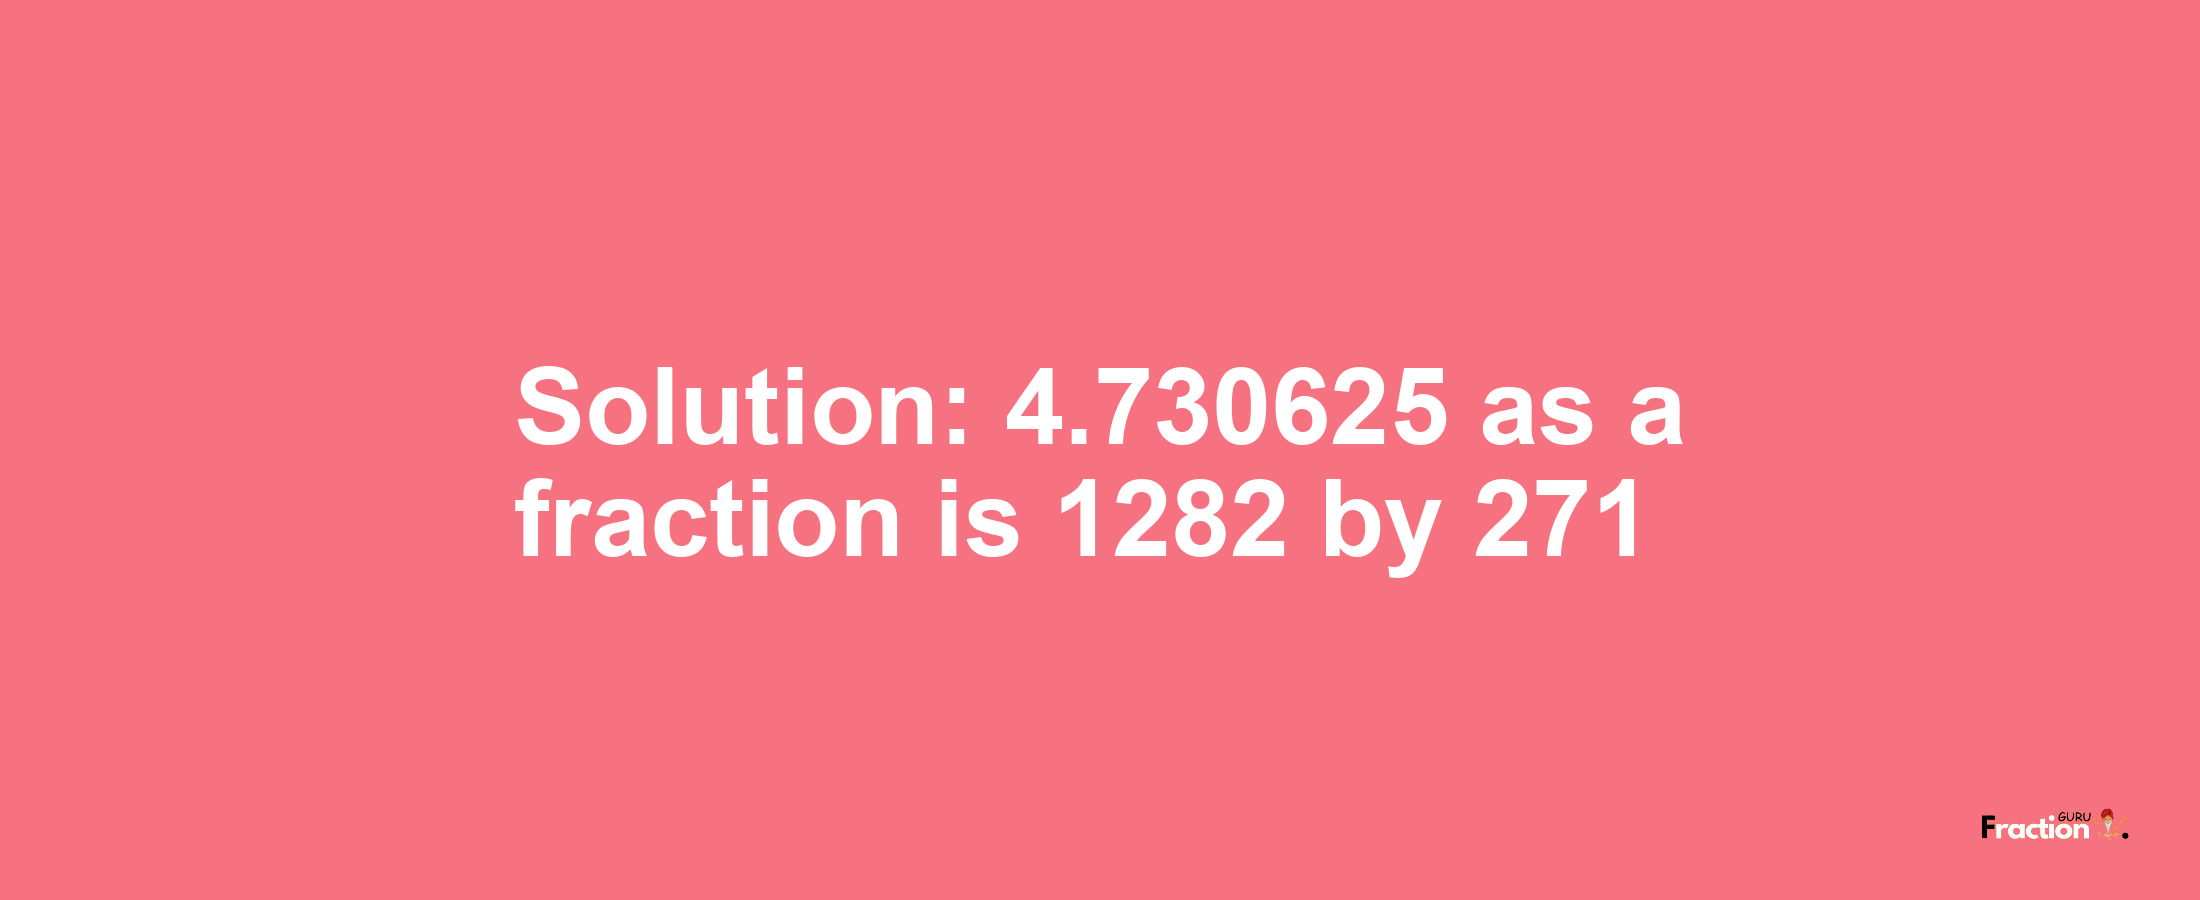 Solution:4.730625 as a fraction is 1282/271